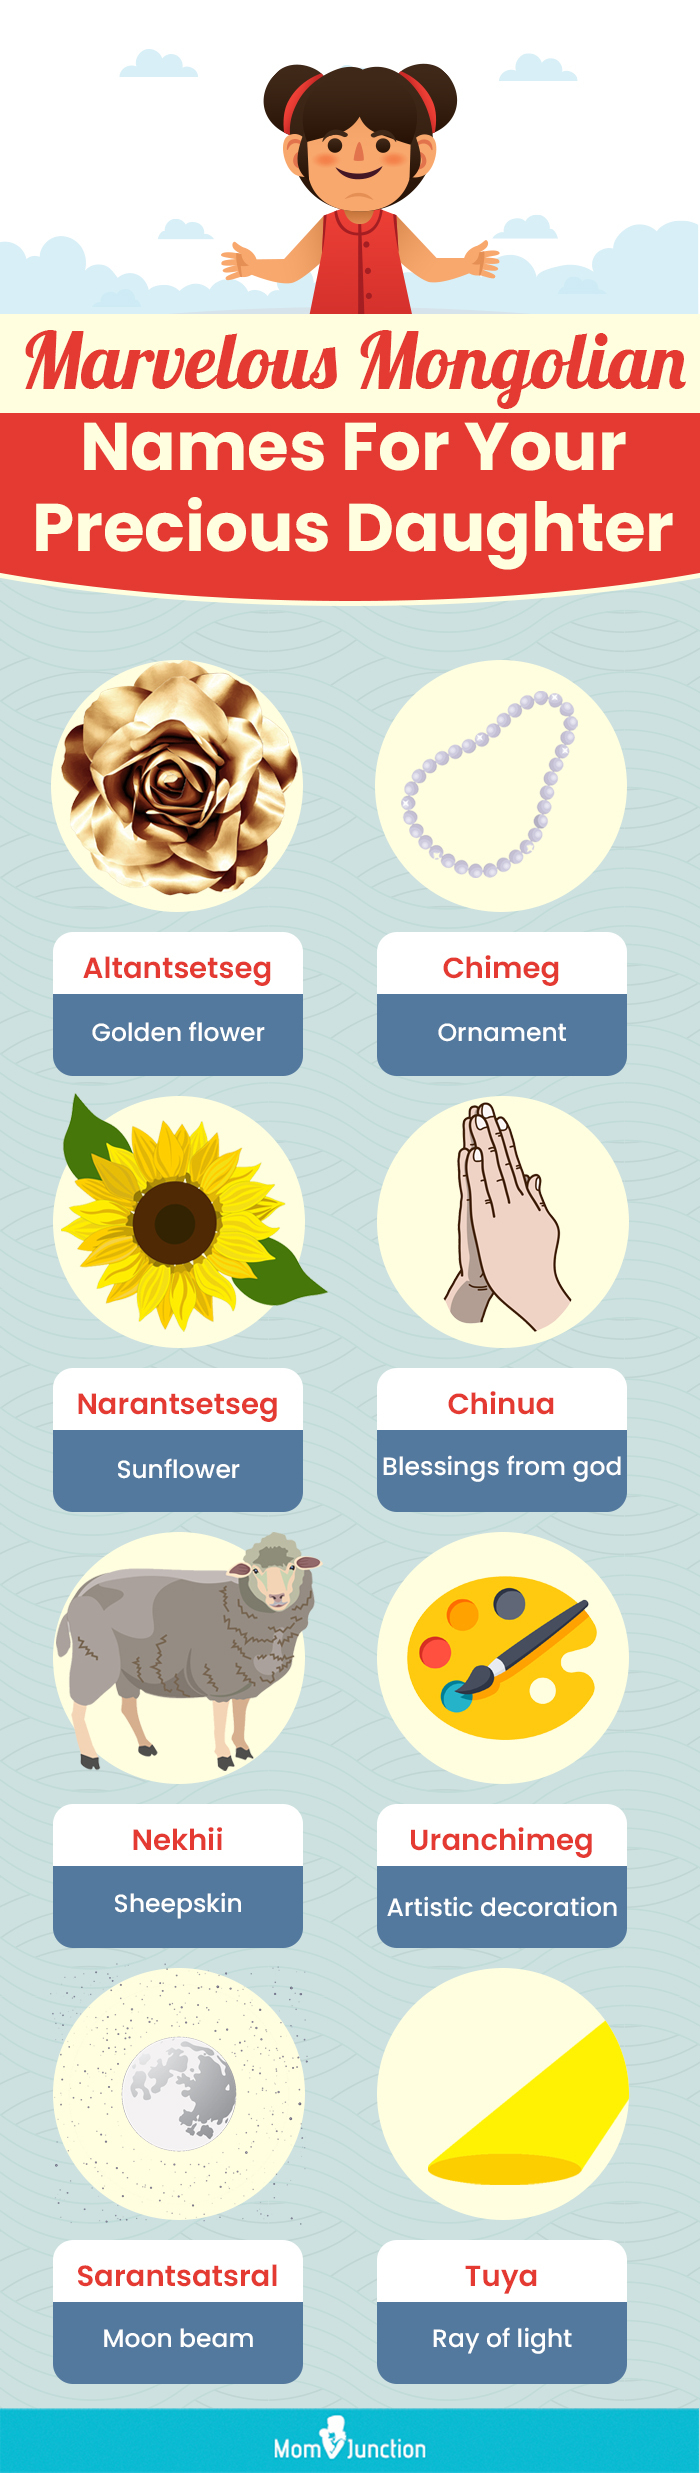 marvelous mongolian names for your precious daughter (infographic)